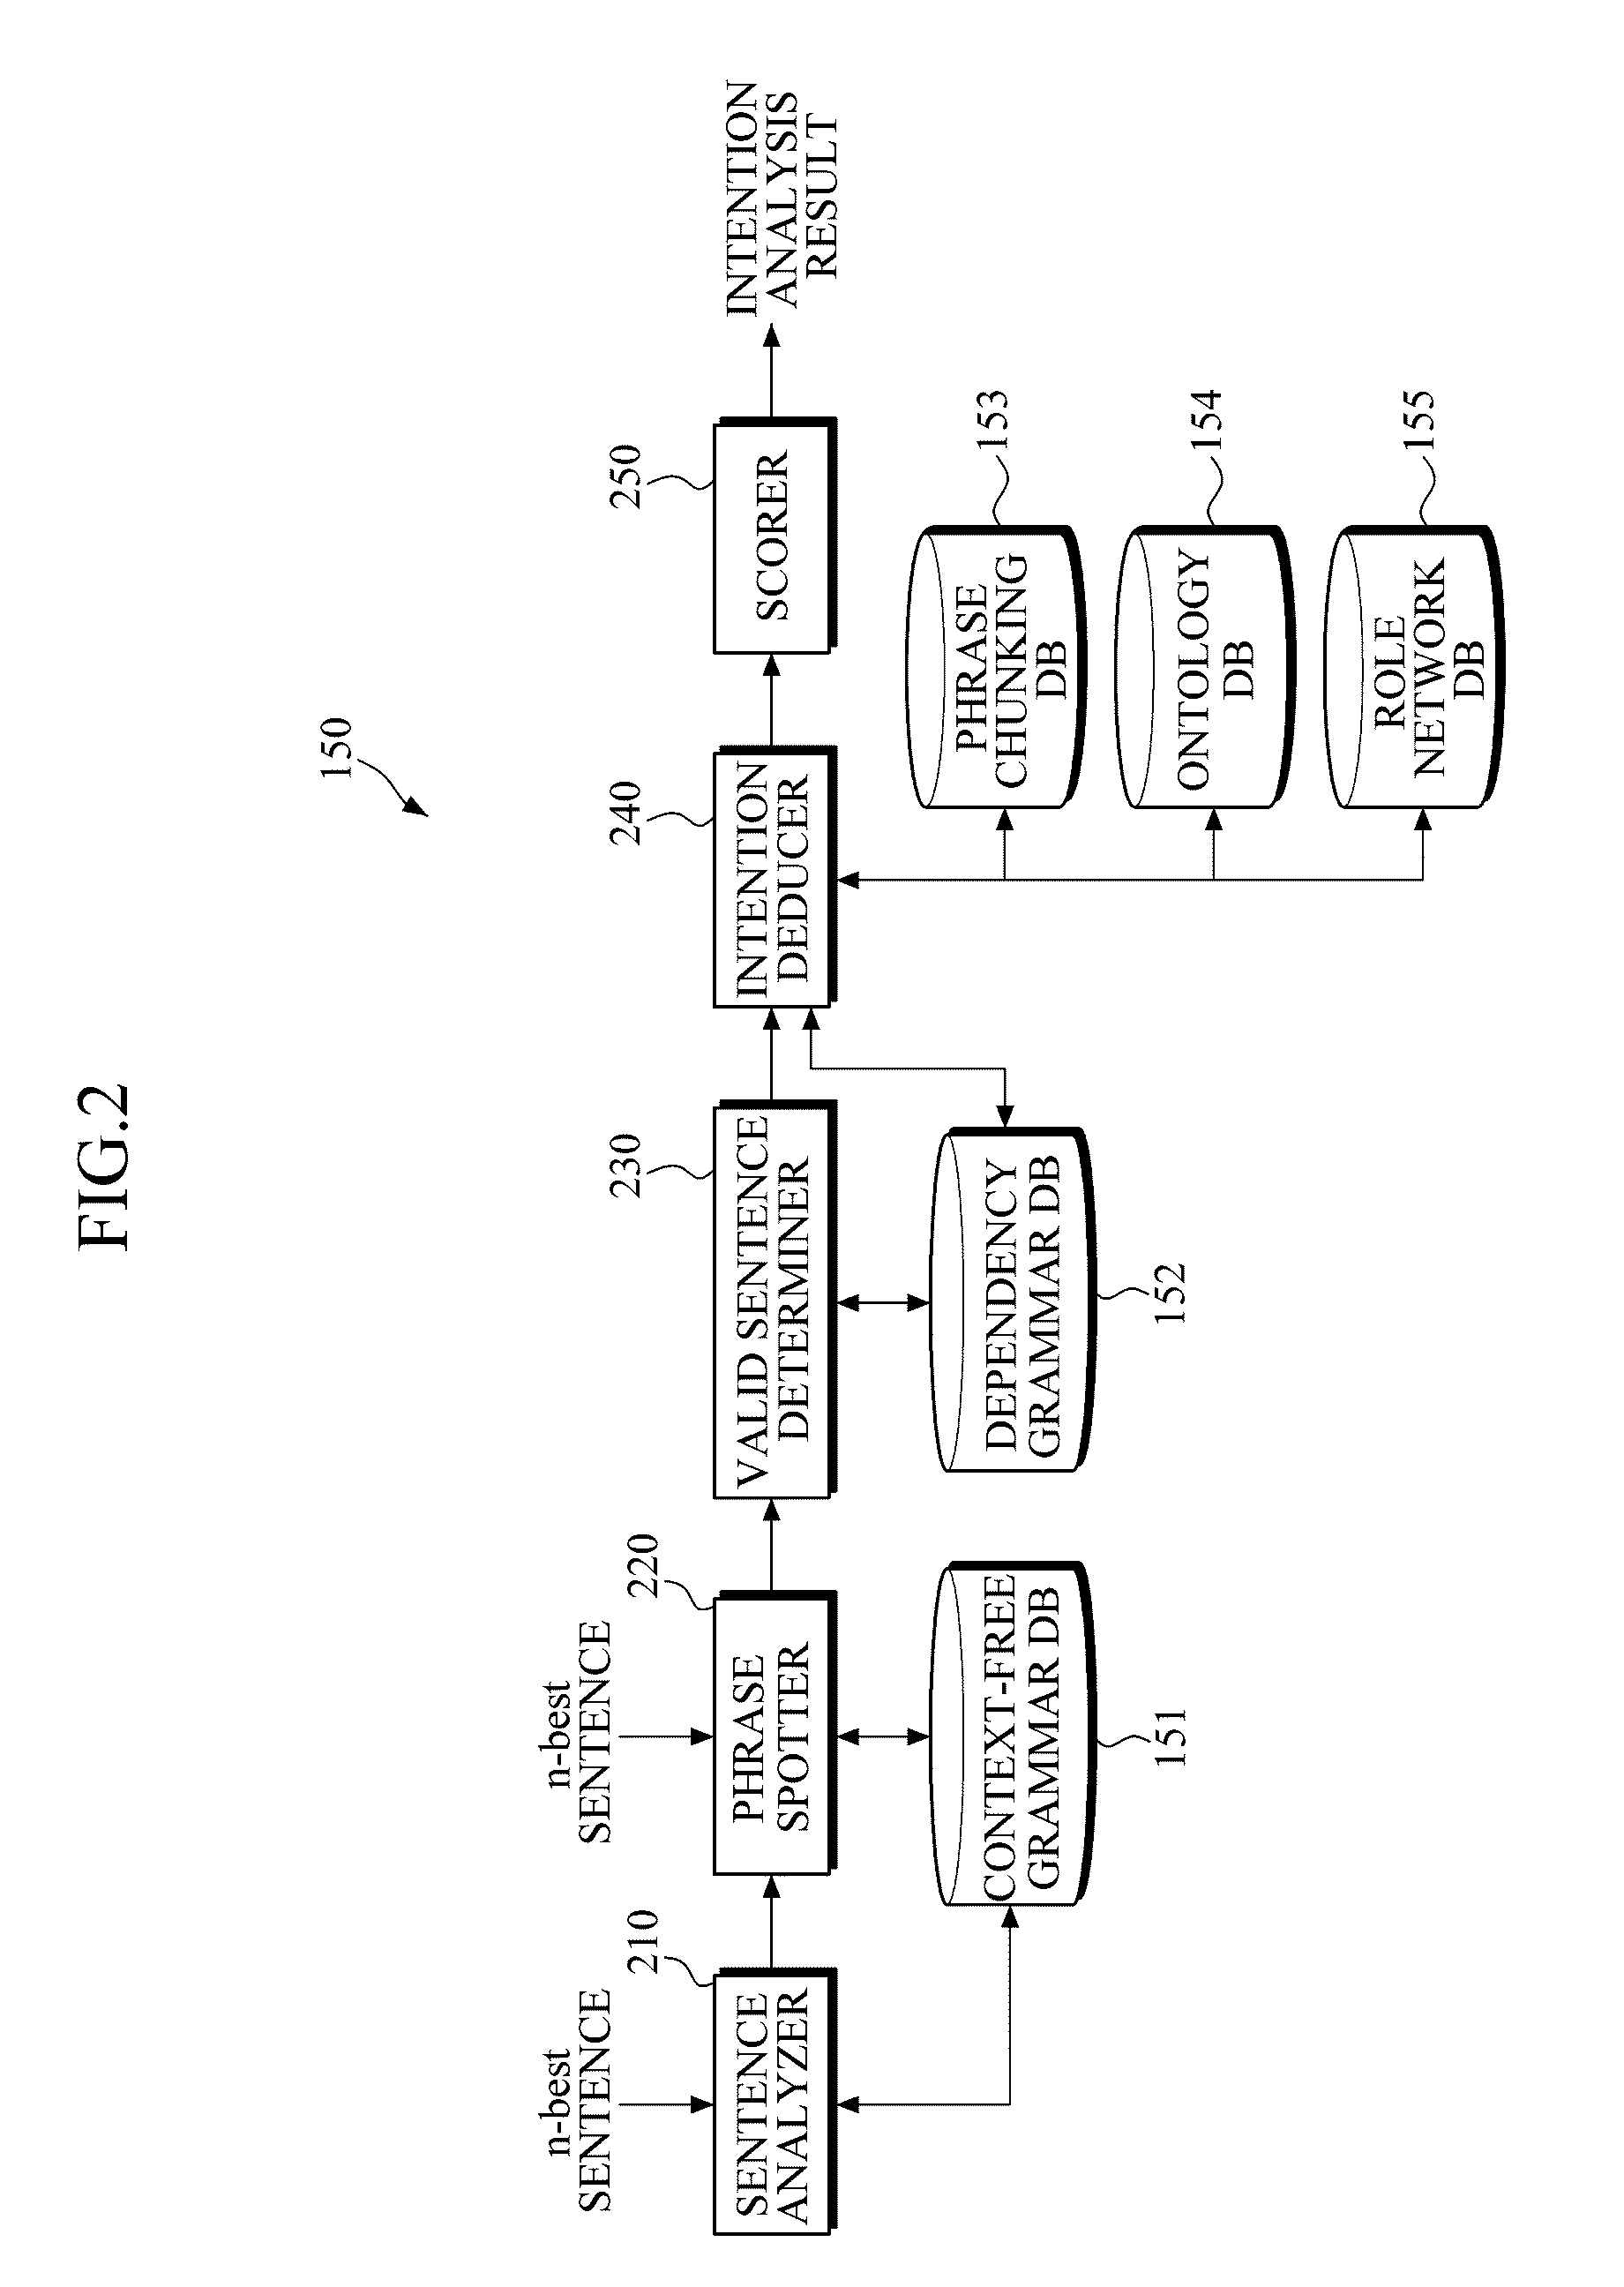 Apparatus and Method for Analyzing Intention